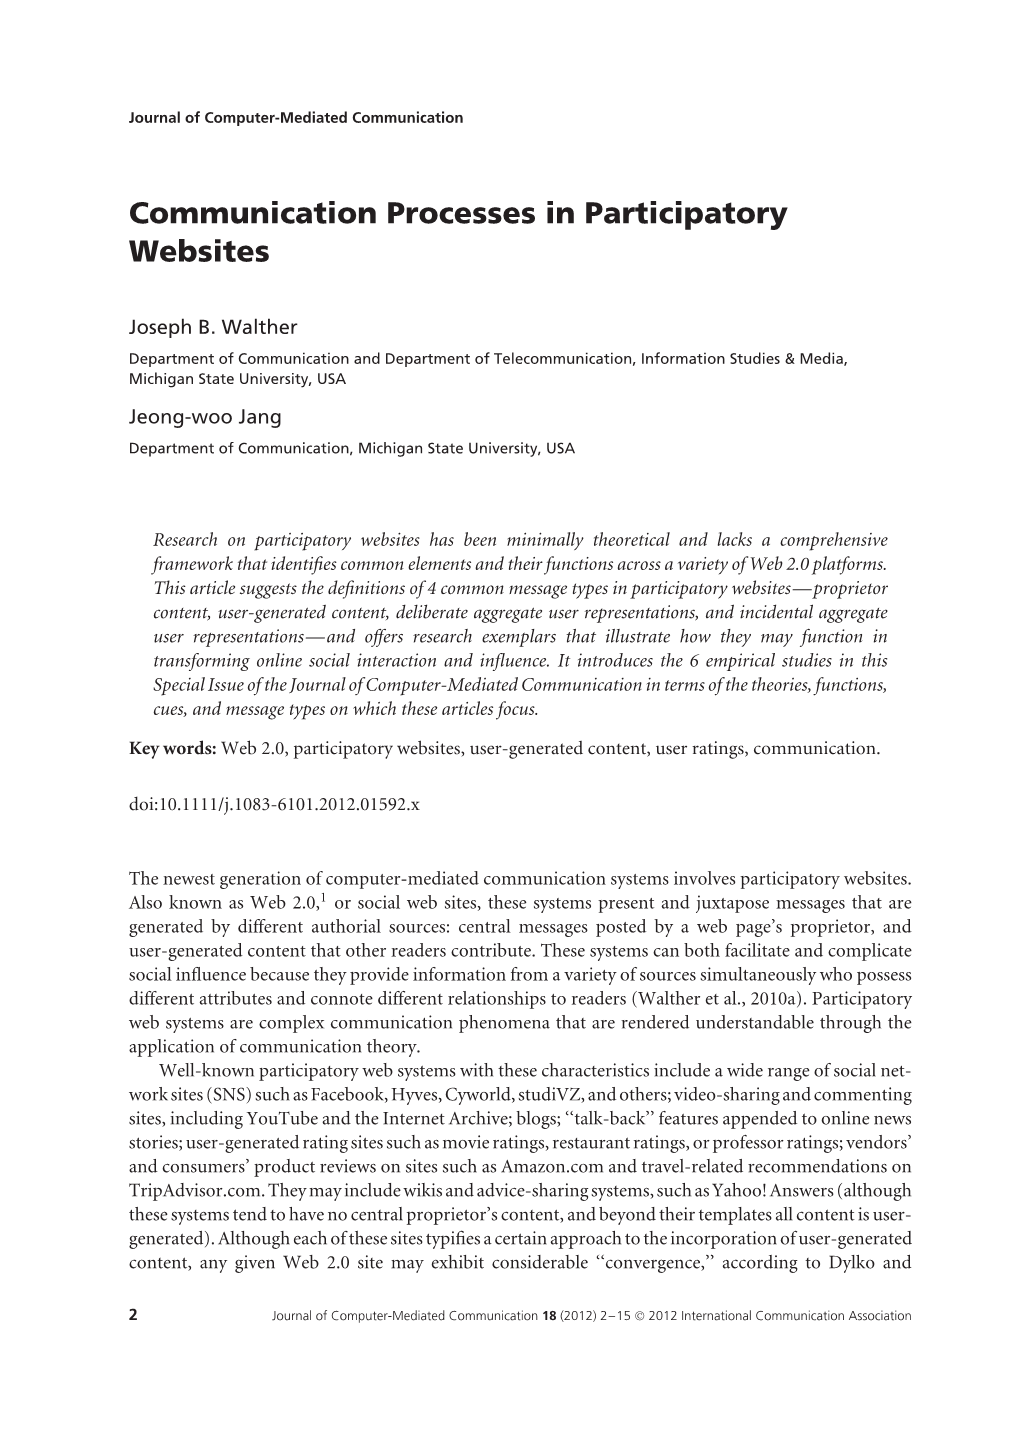 Communication Processes in Participatory Websites